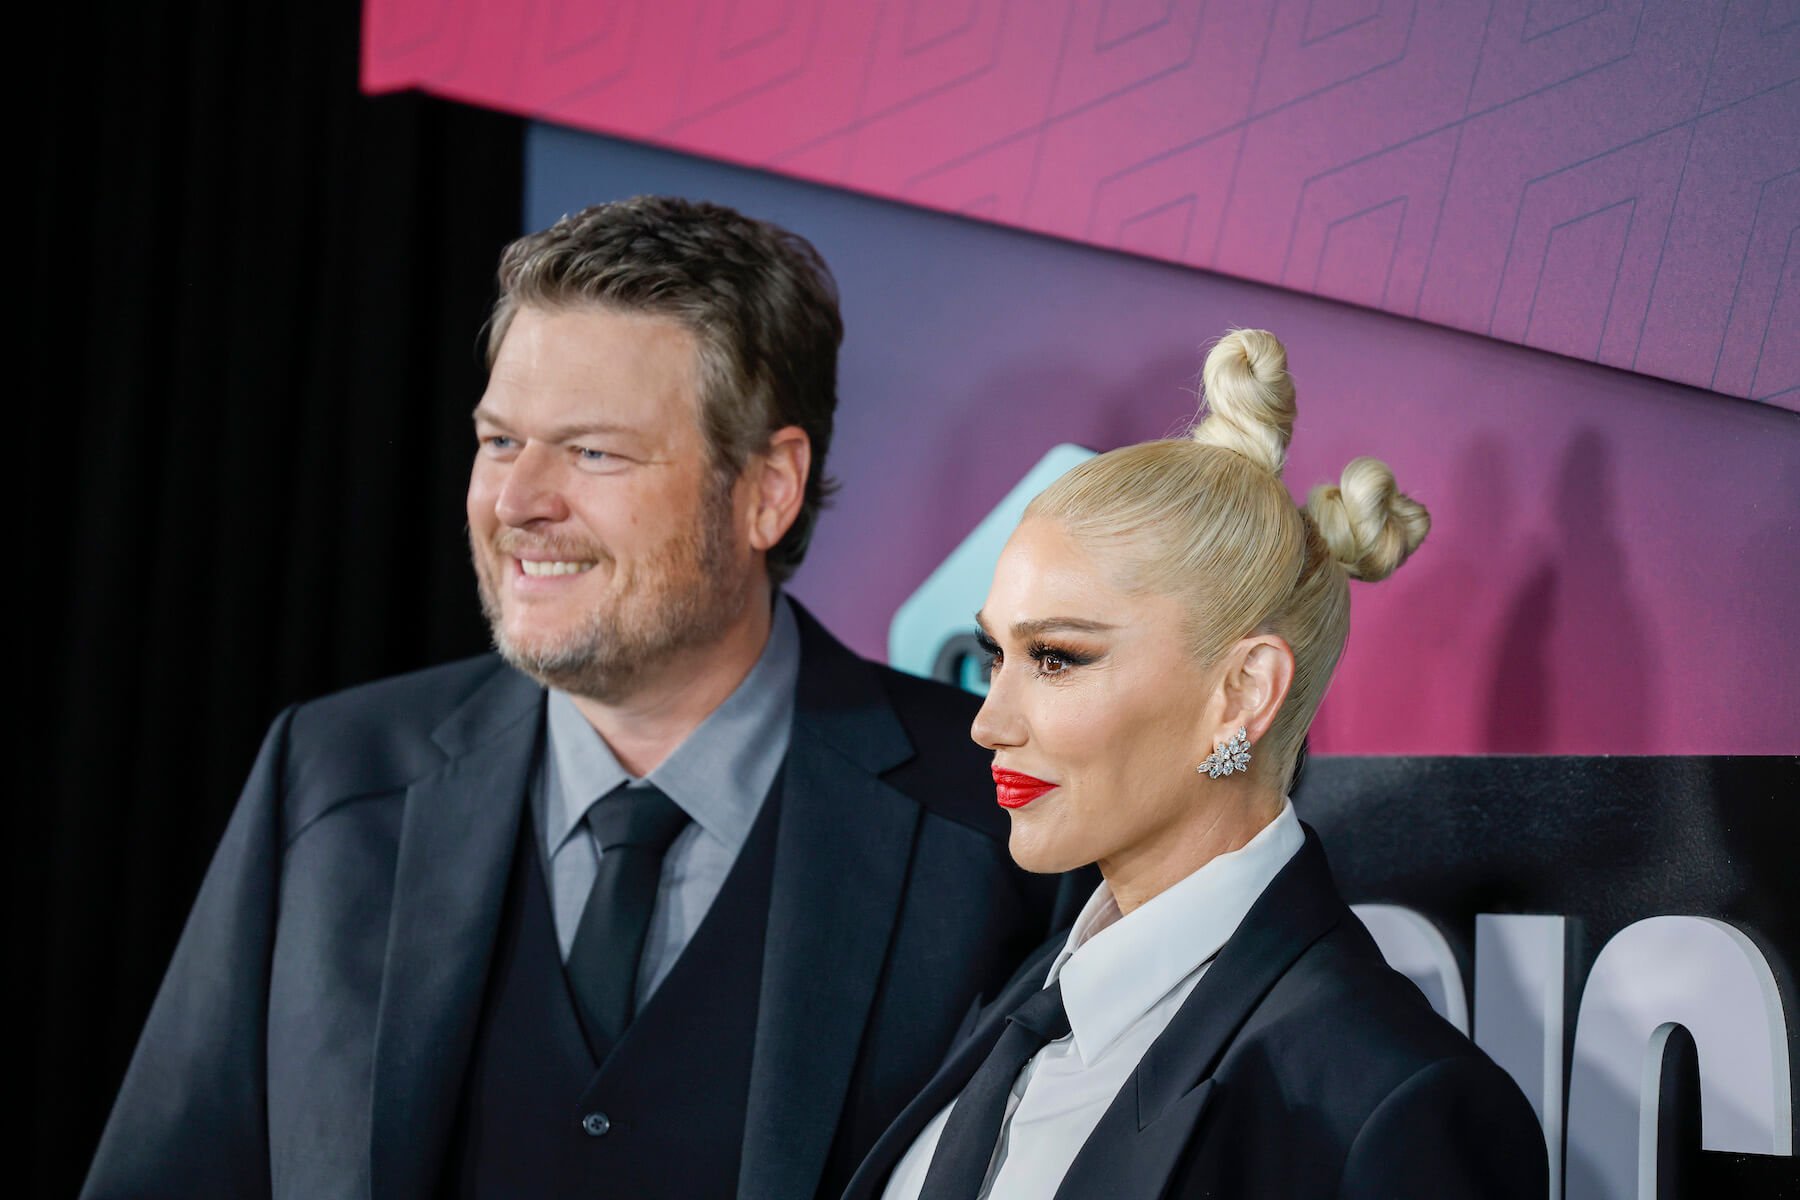 Blake Shelton and Gwen Stefani wearing suits at an event